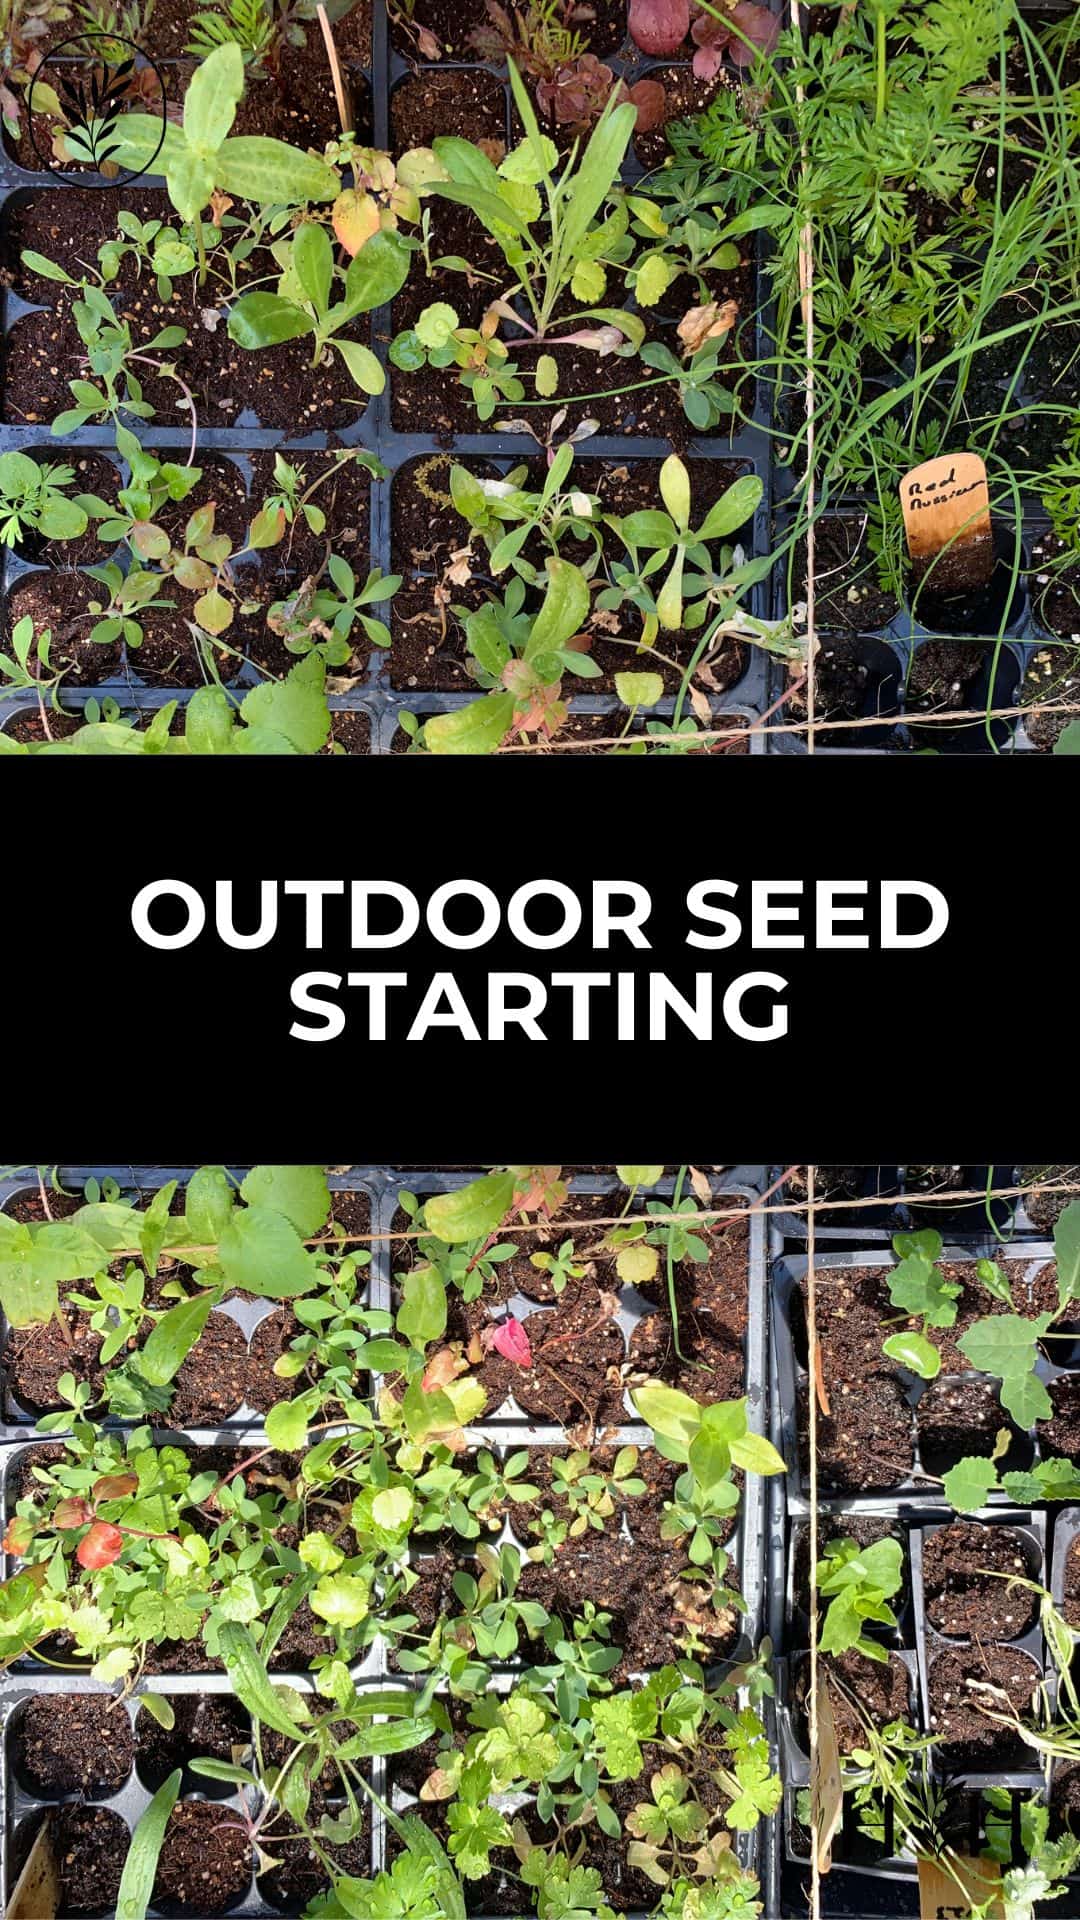 Outdoor seed starting via @home4theharvest